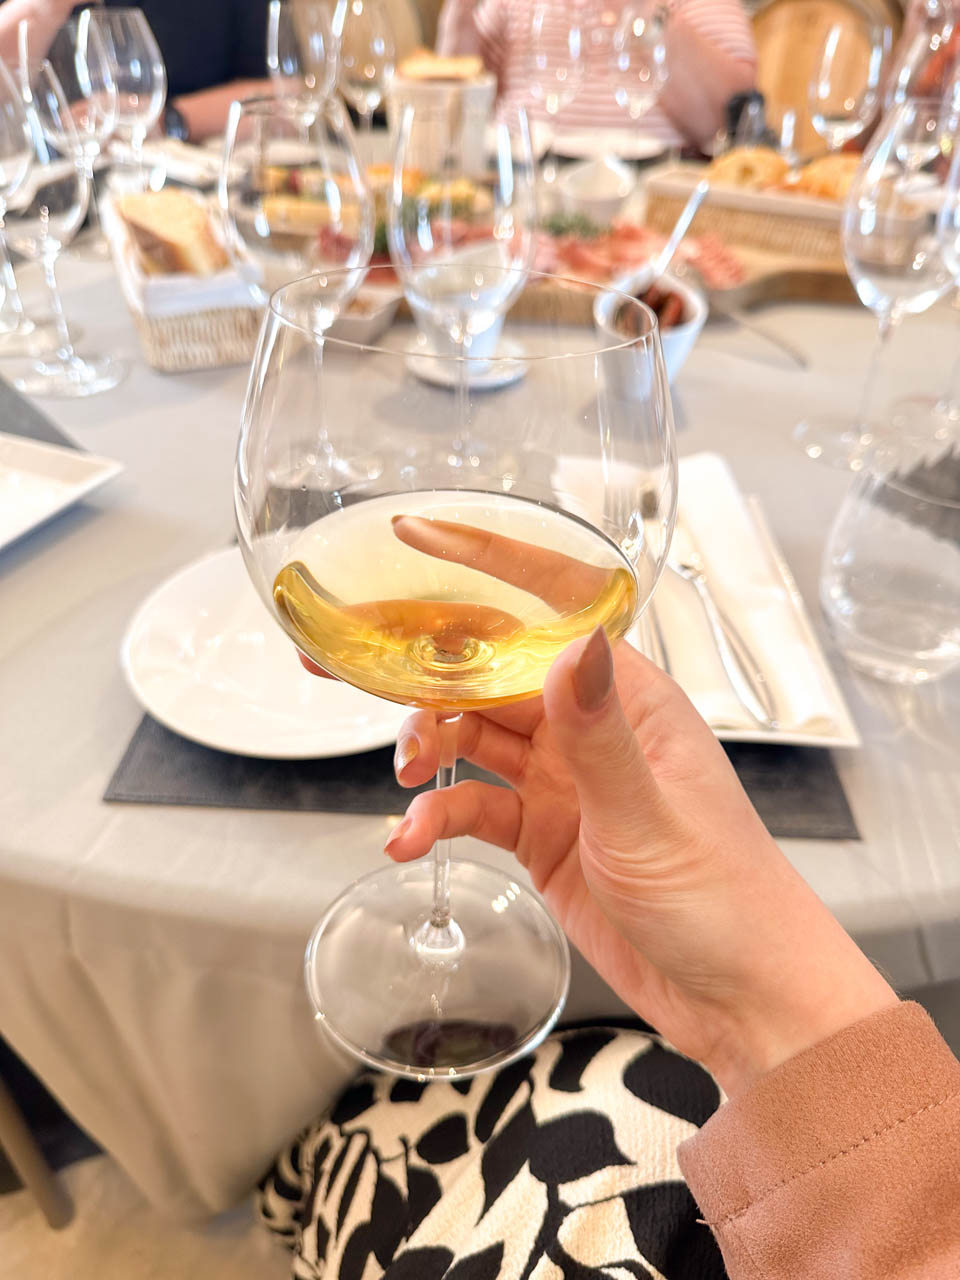 A woman's hand holding up a glass with white chardonnay wine